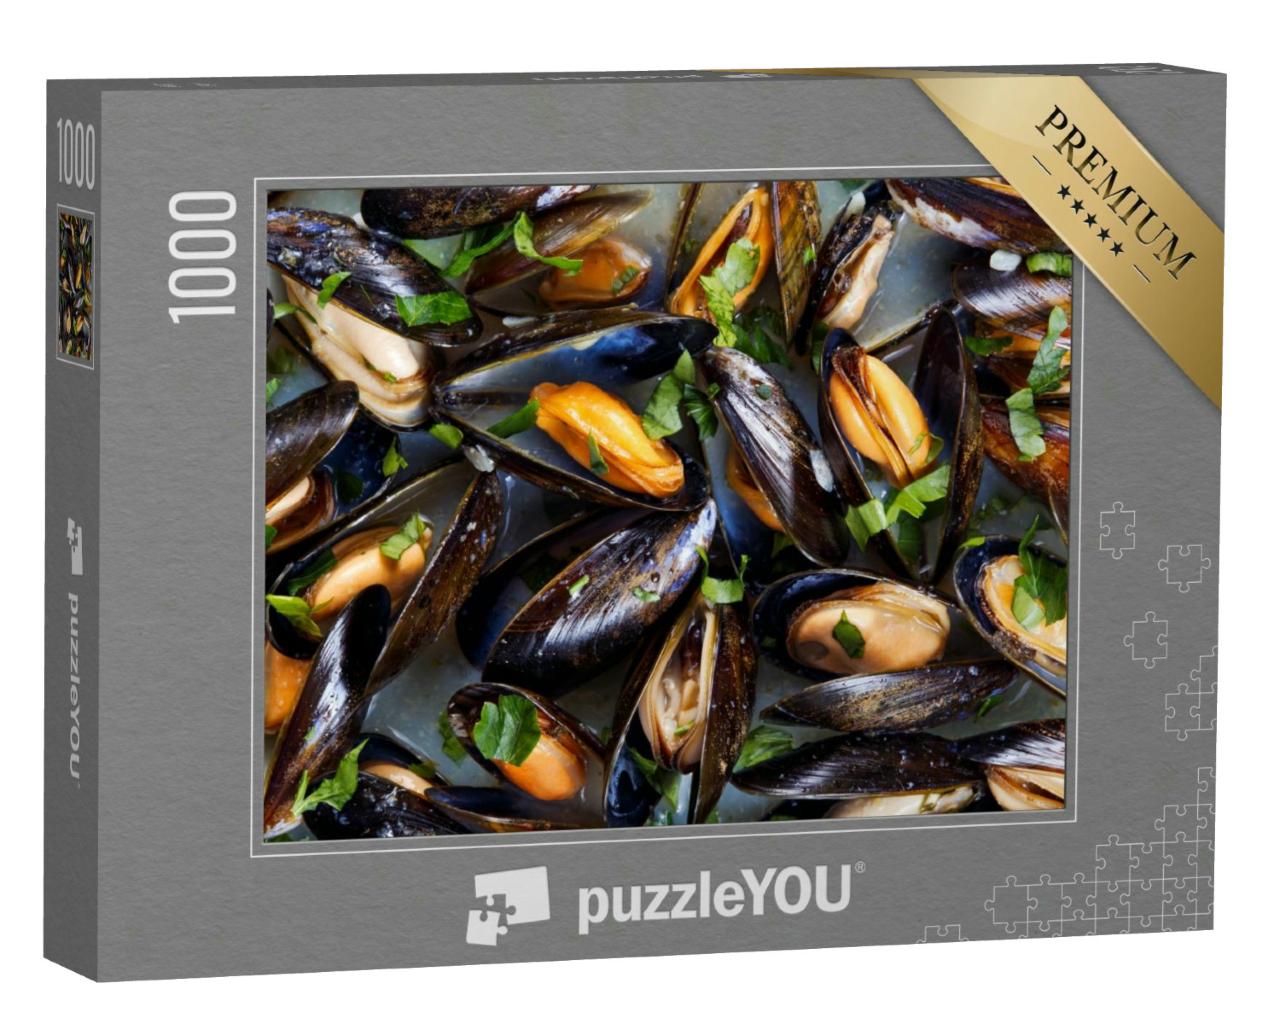 Puzzle 1000 Teile „Miesmuscheln in Knoblauch-Butter-Sauce“